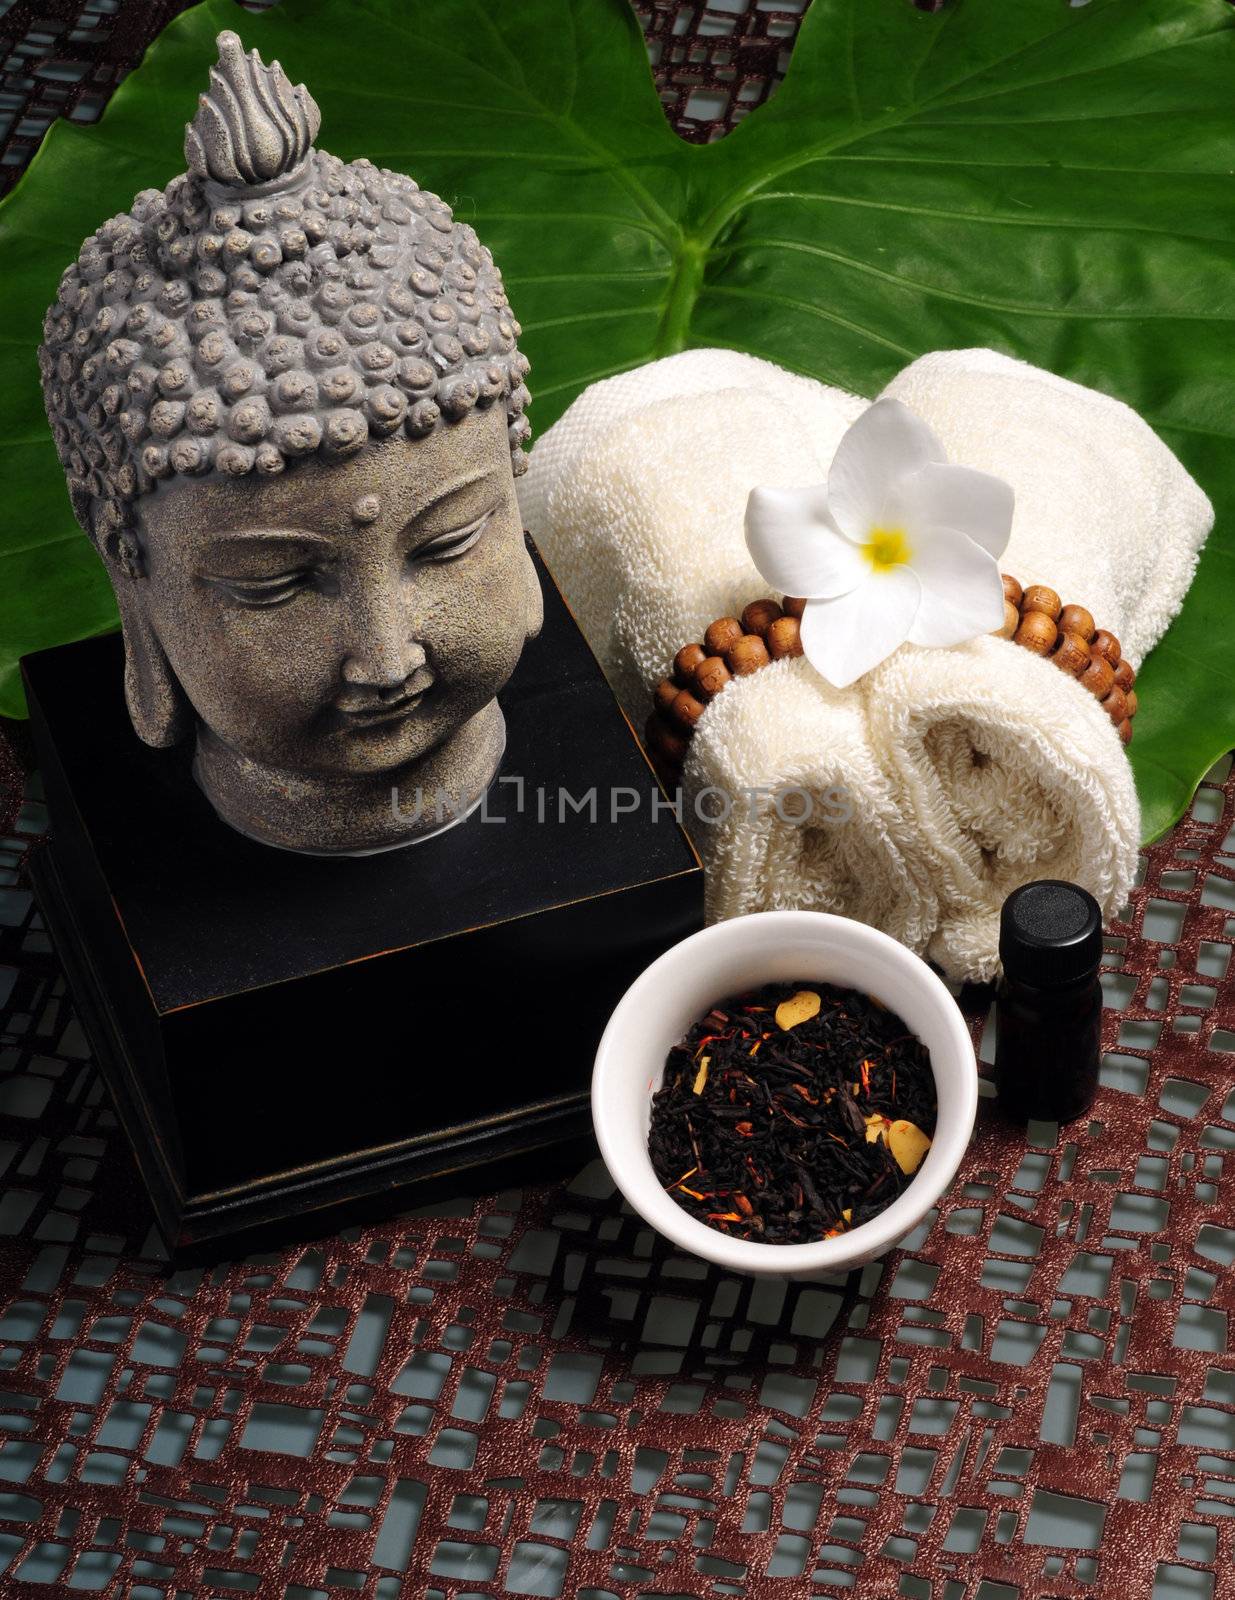 An arrangement of items used at a day spa for aromatherapy in an Asian spa